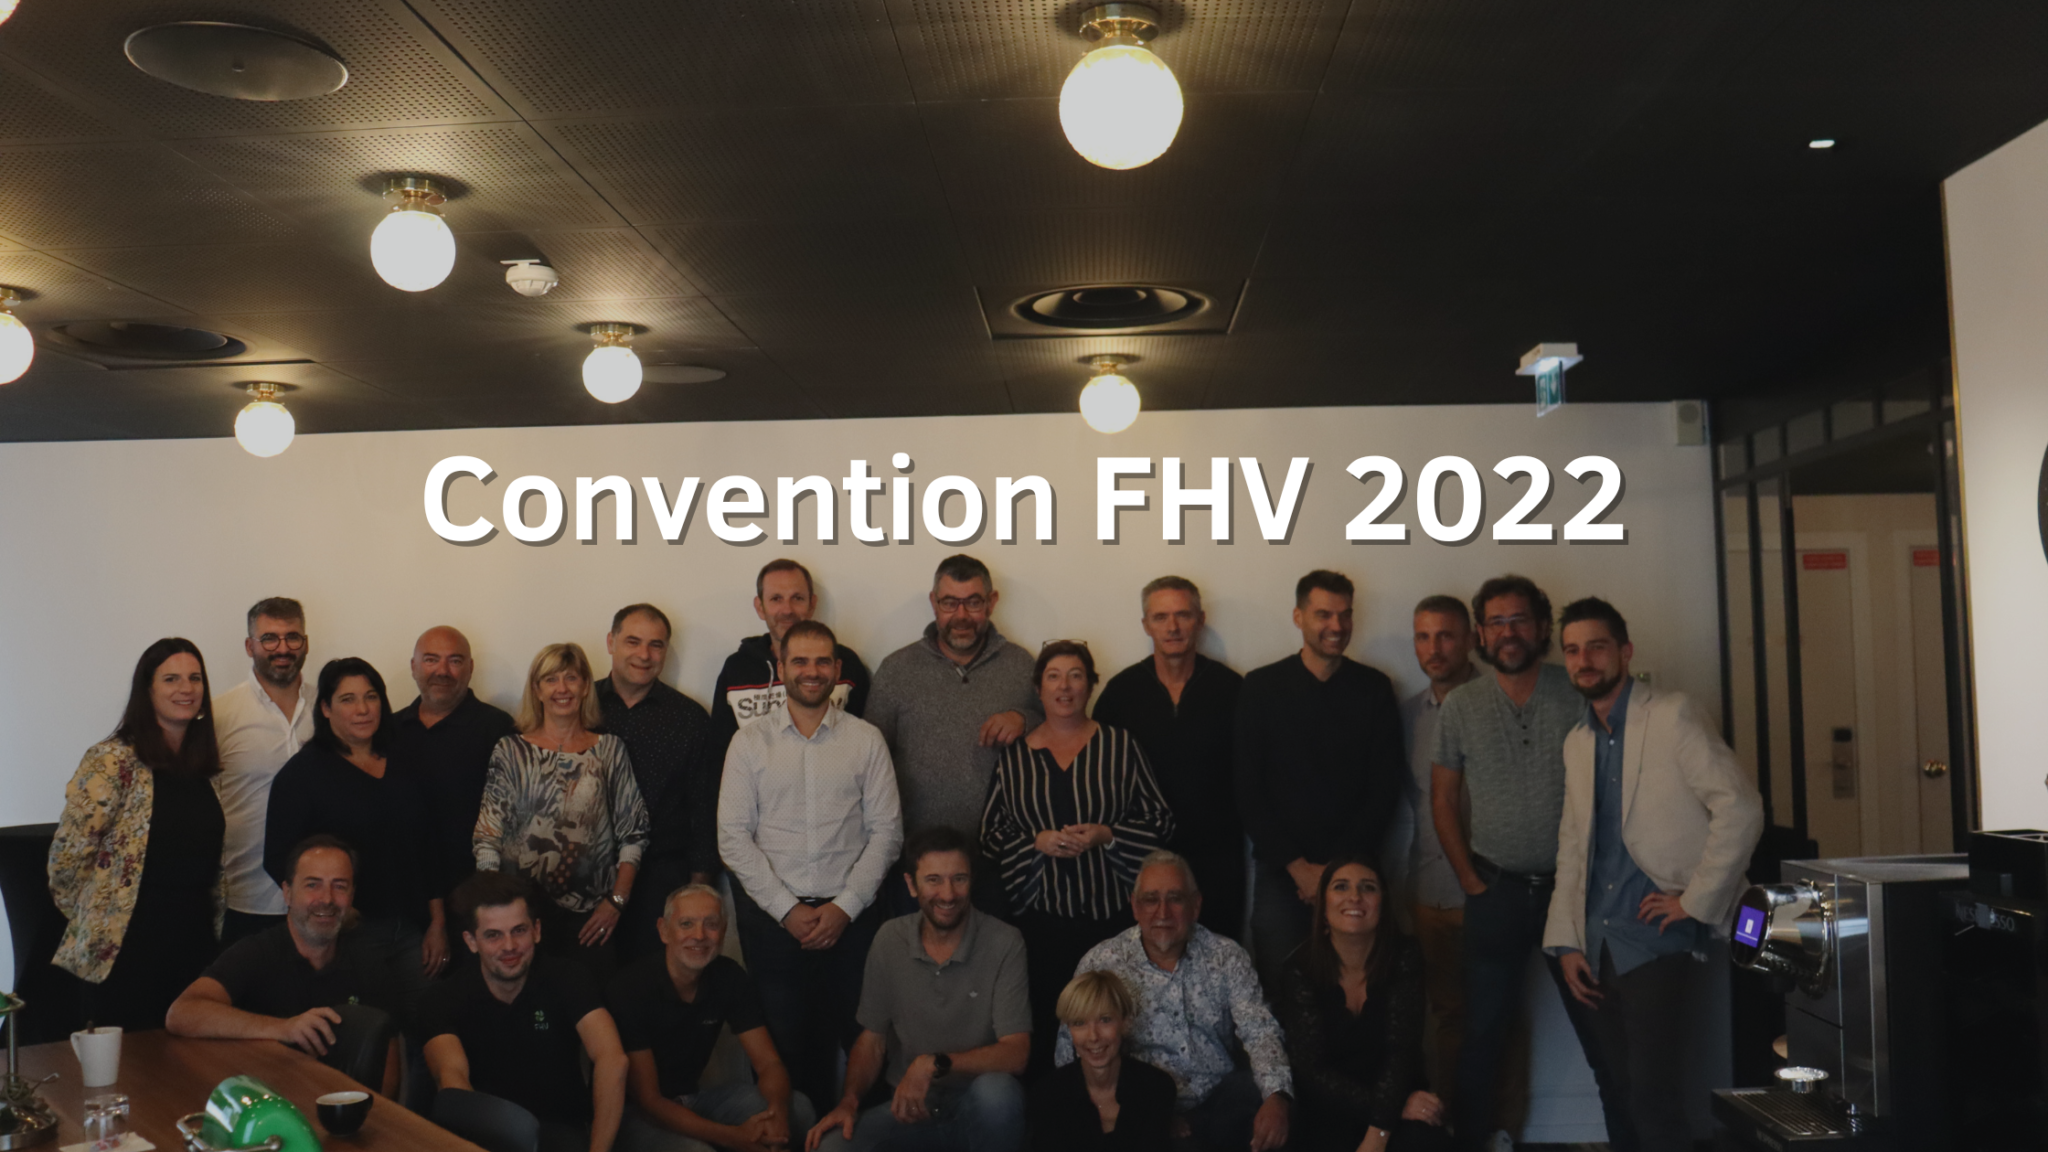 Convention FHV